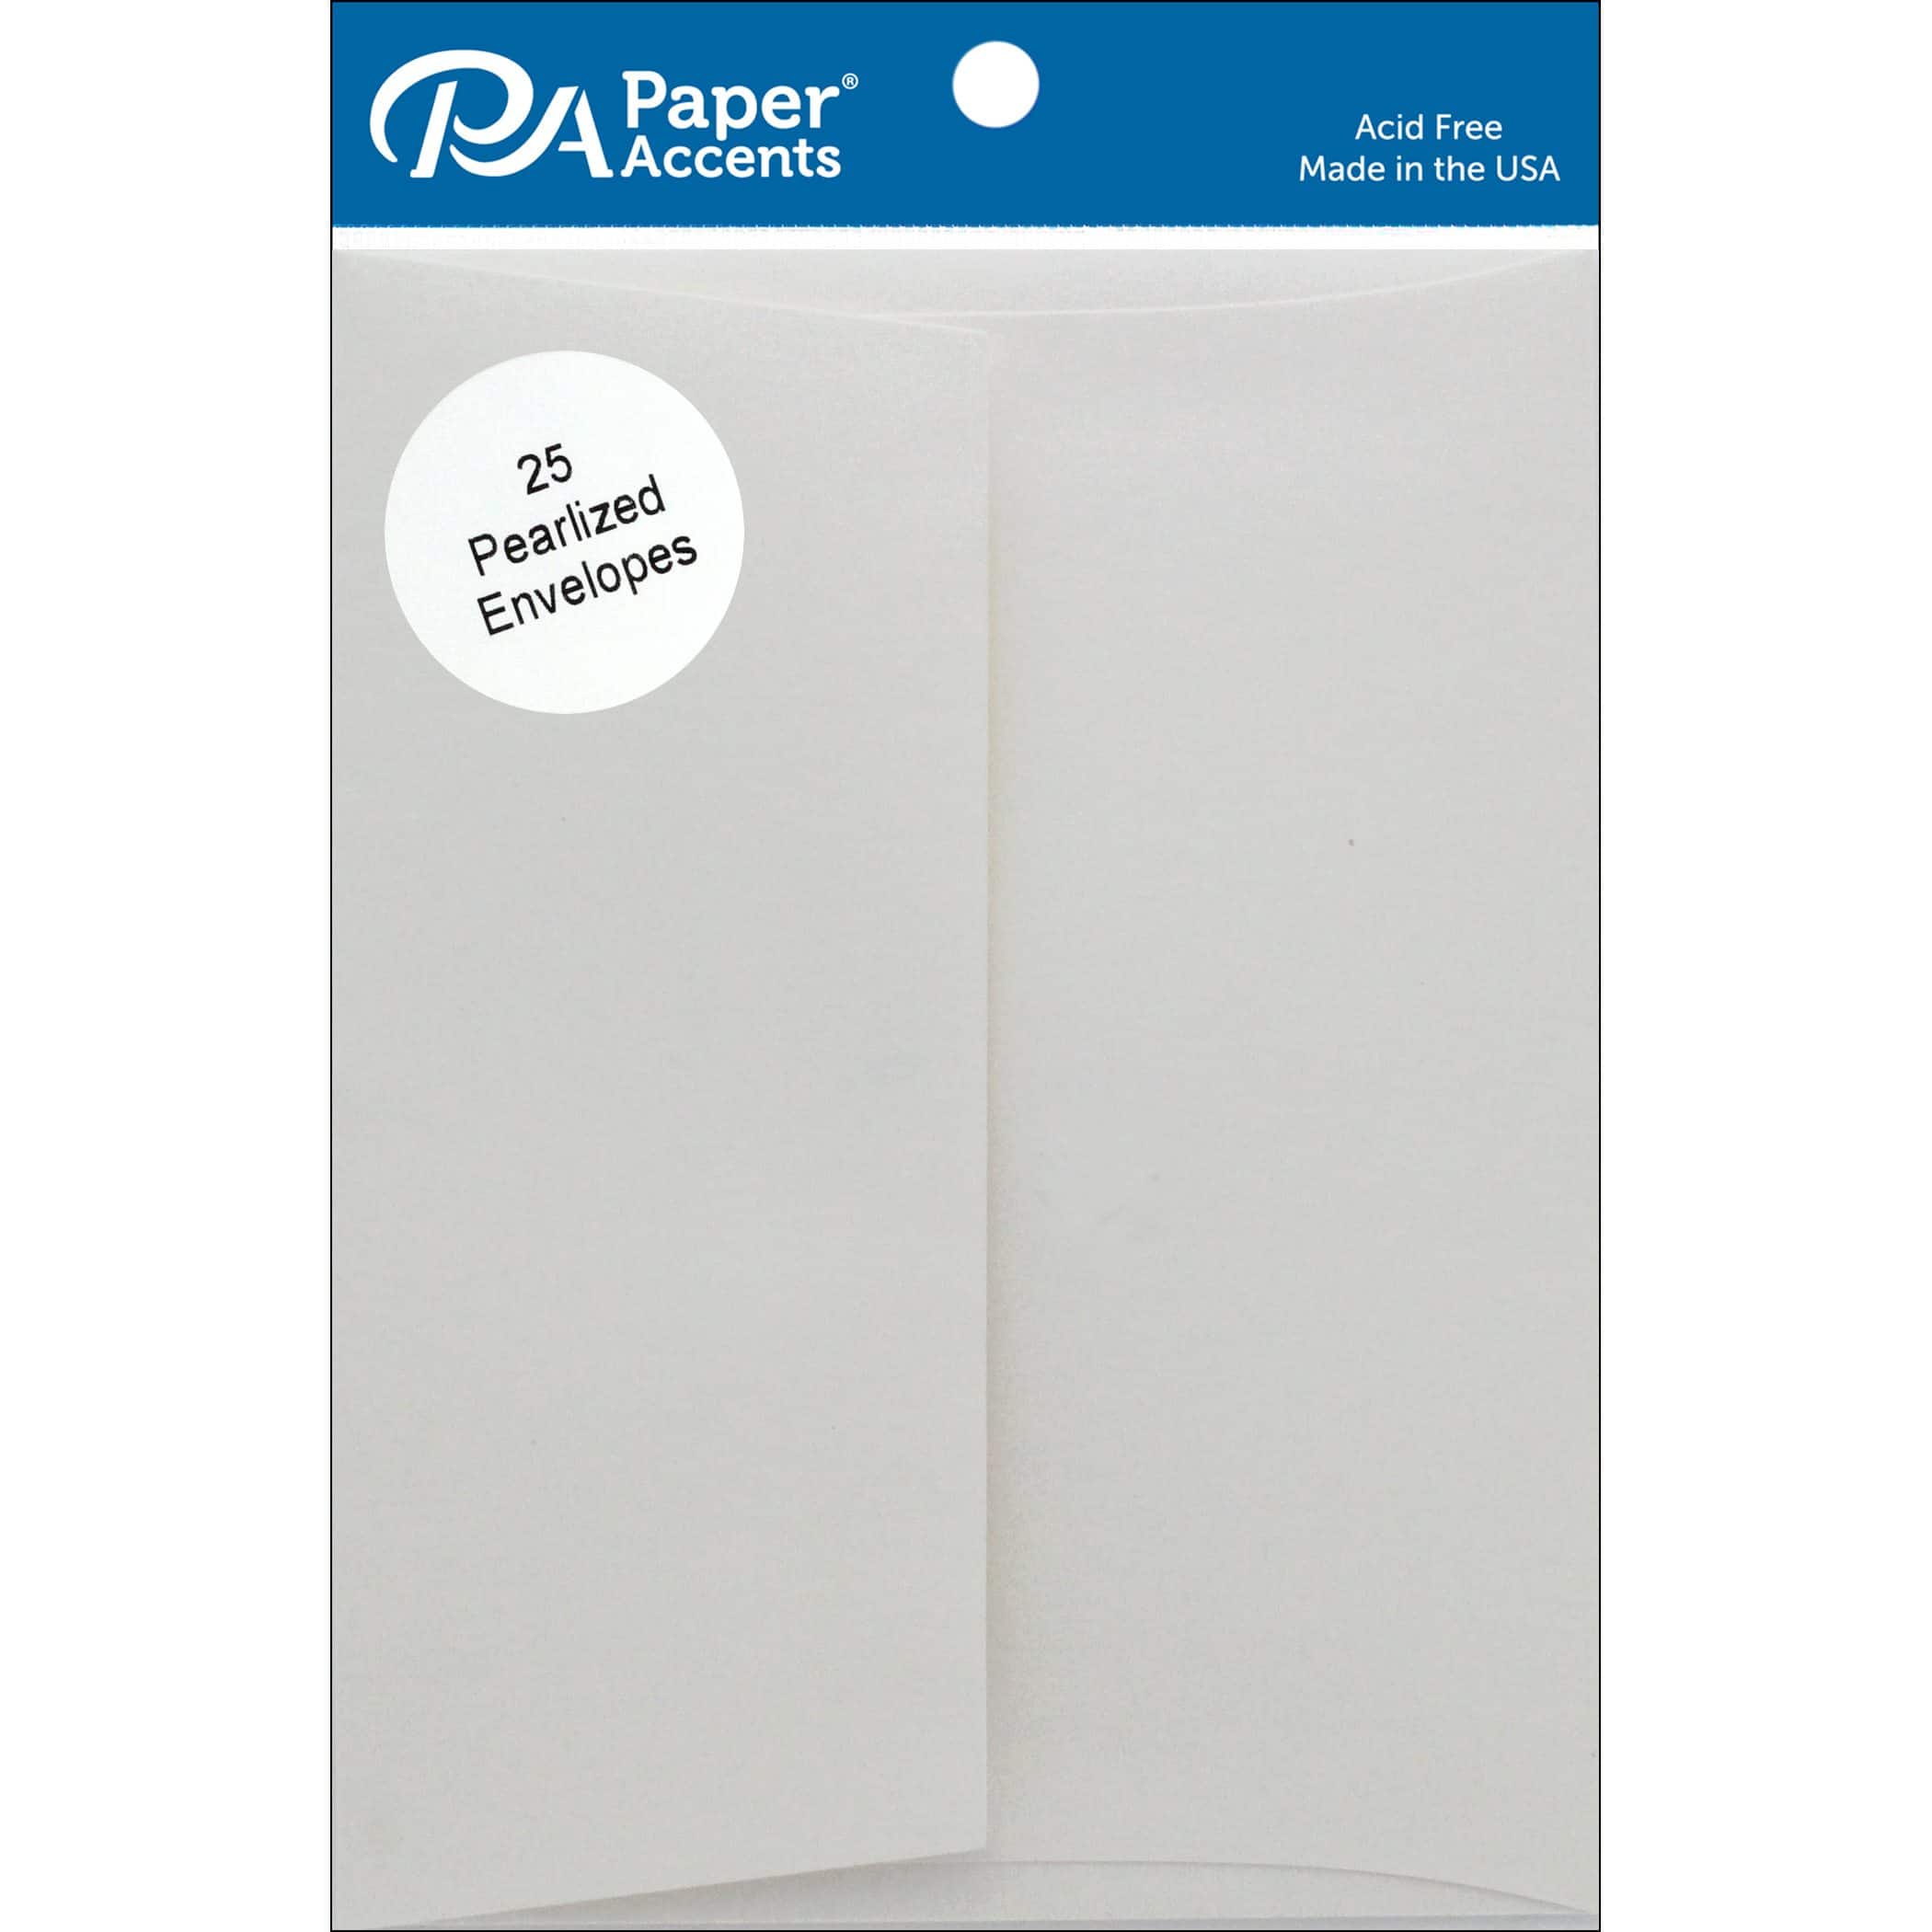 PA Paper™ Accents 4.38" x 5.75" Pearlized Envelope, 25ct.